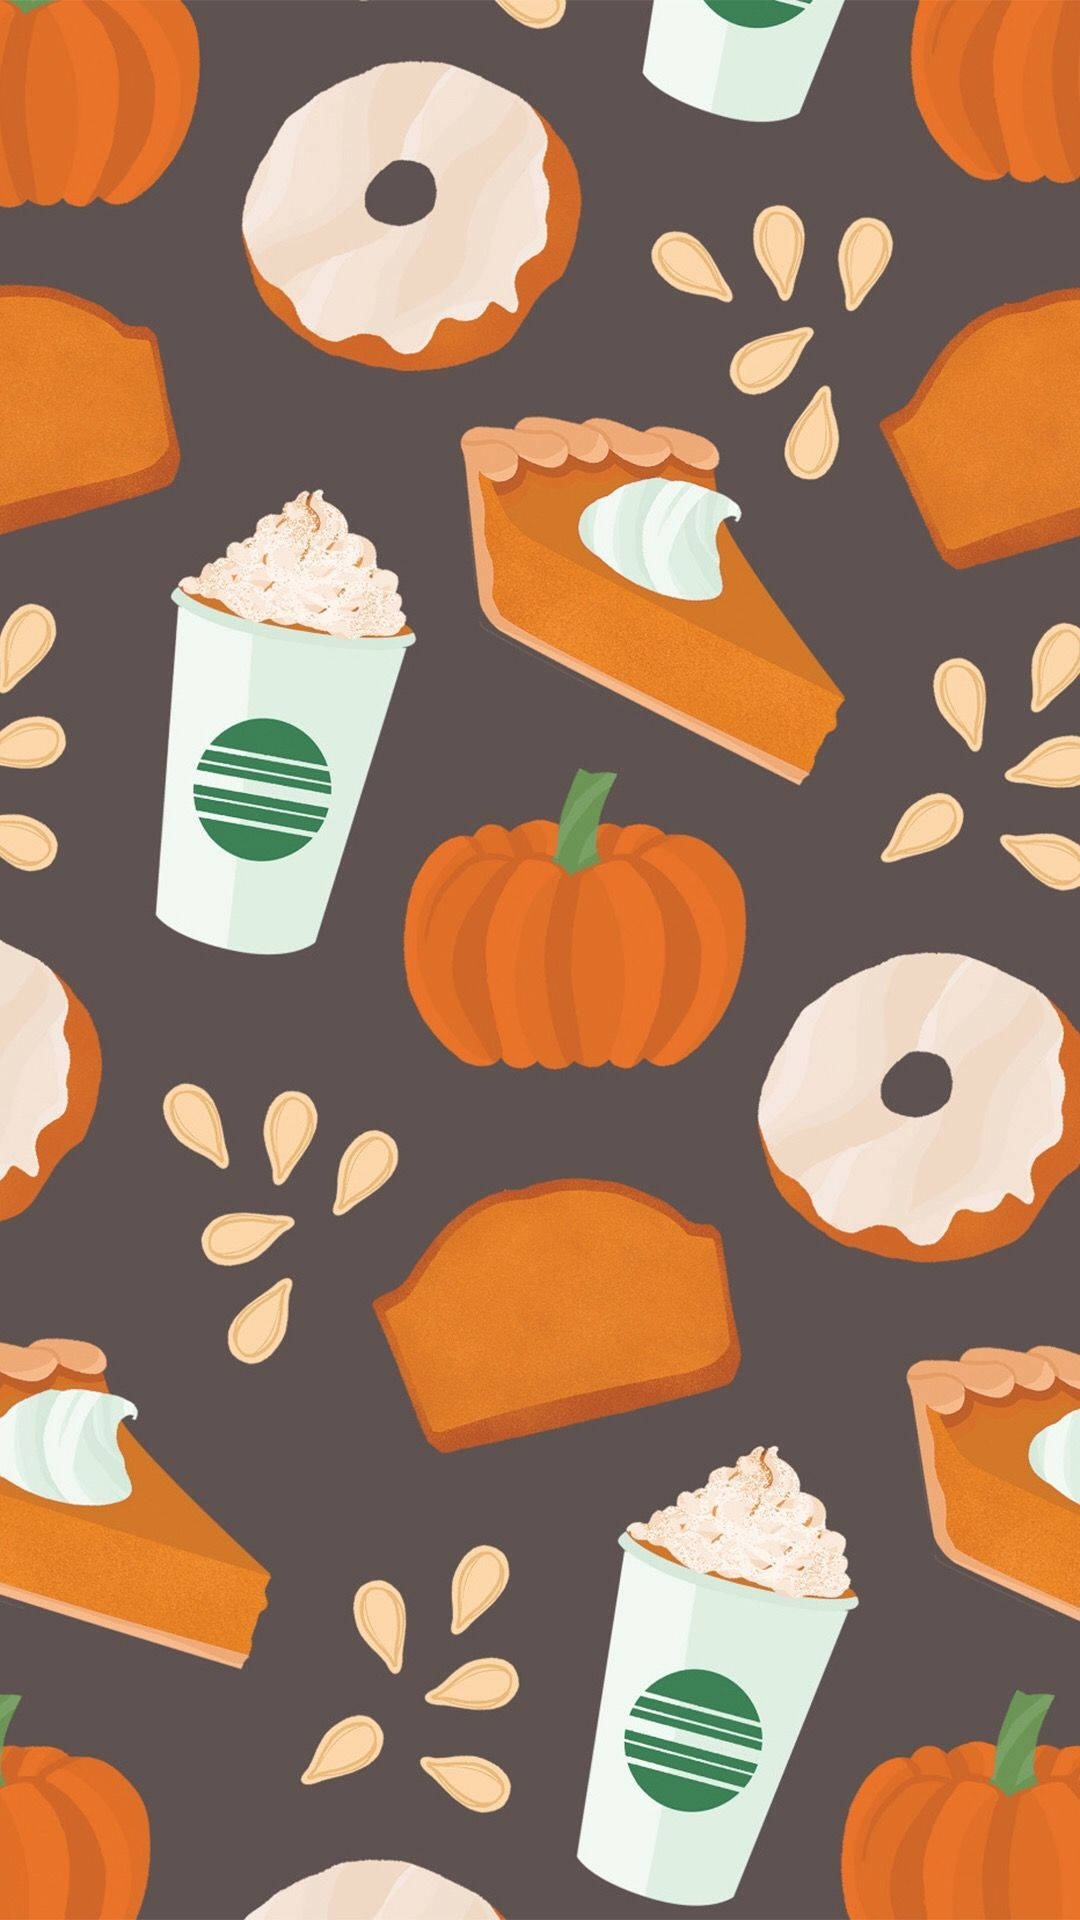 Capture the Beauty of Fall with a Cute Phone Wallpaper